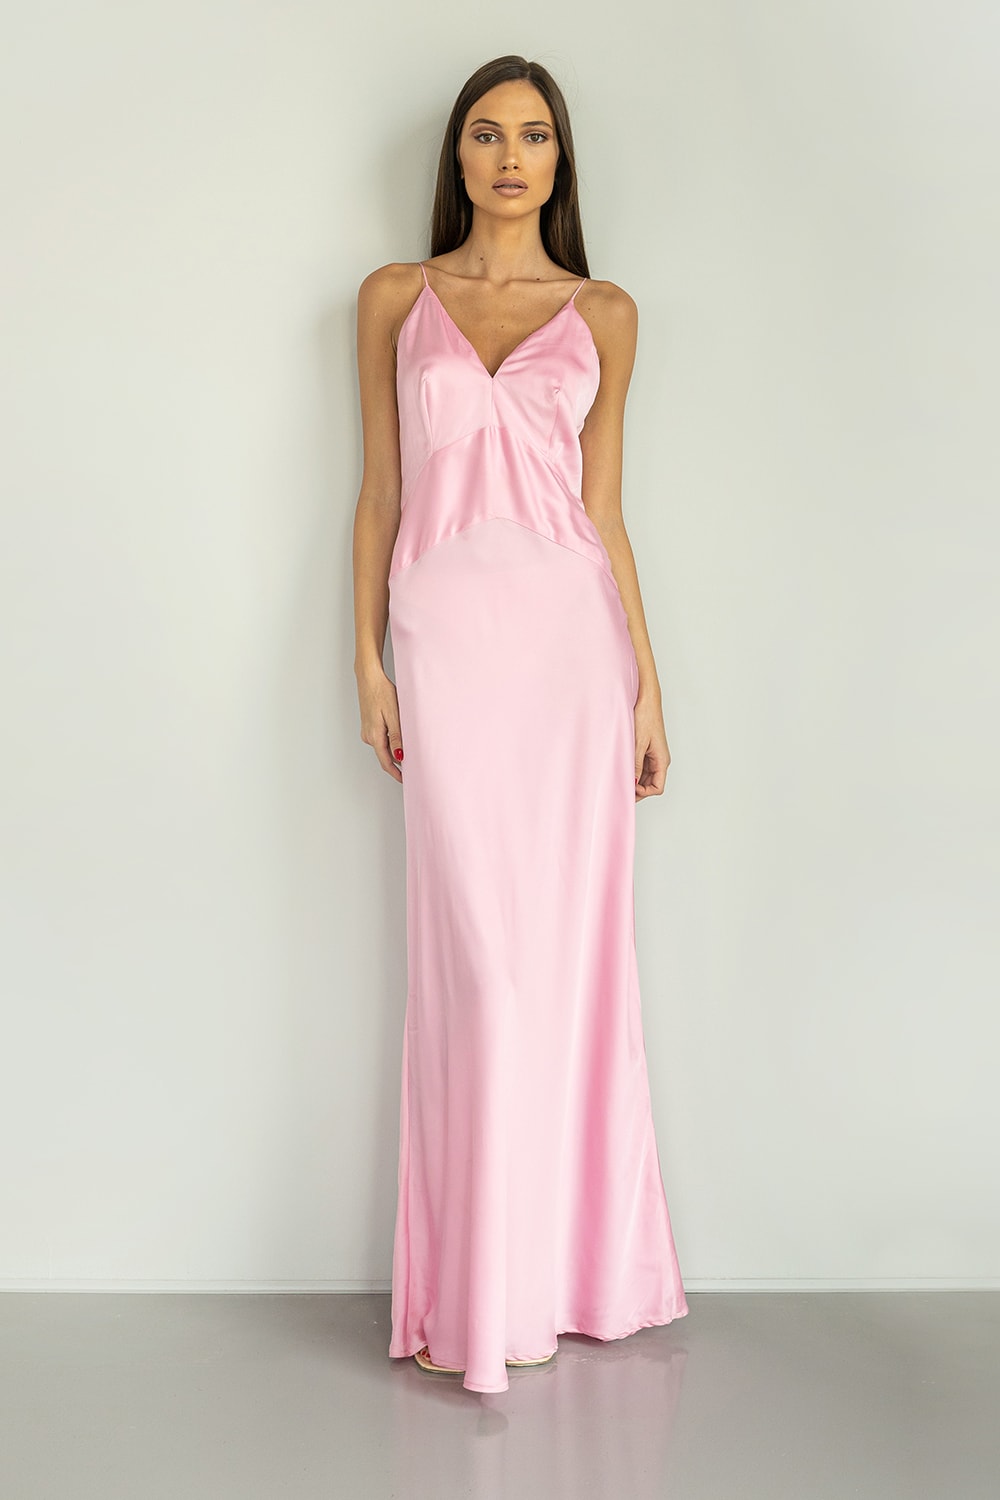 Long camisole dress in pale pink